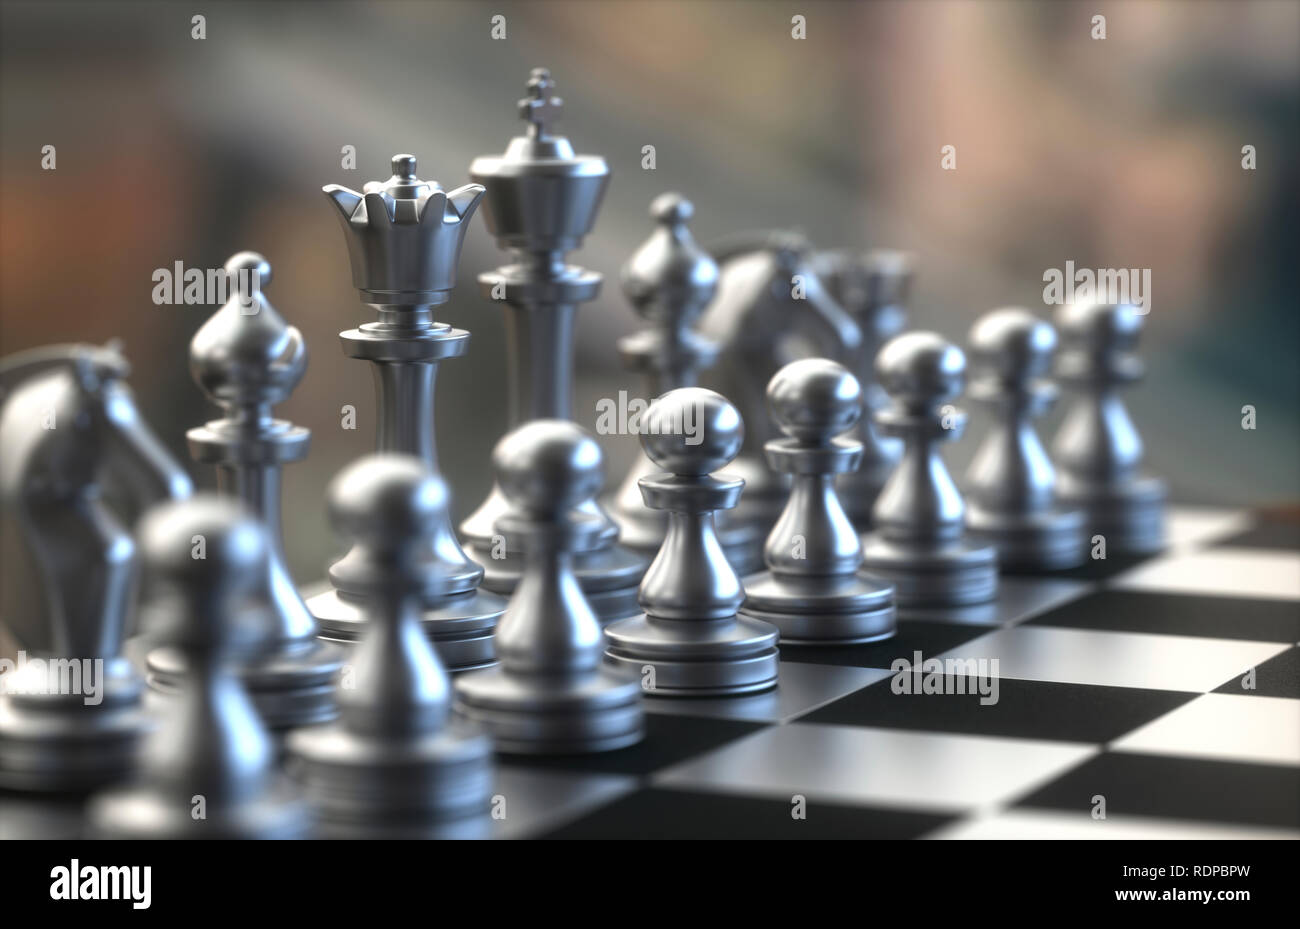 Chess Pieces on a Chess Board · Free Stock Photo